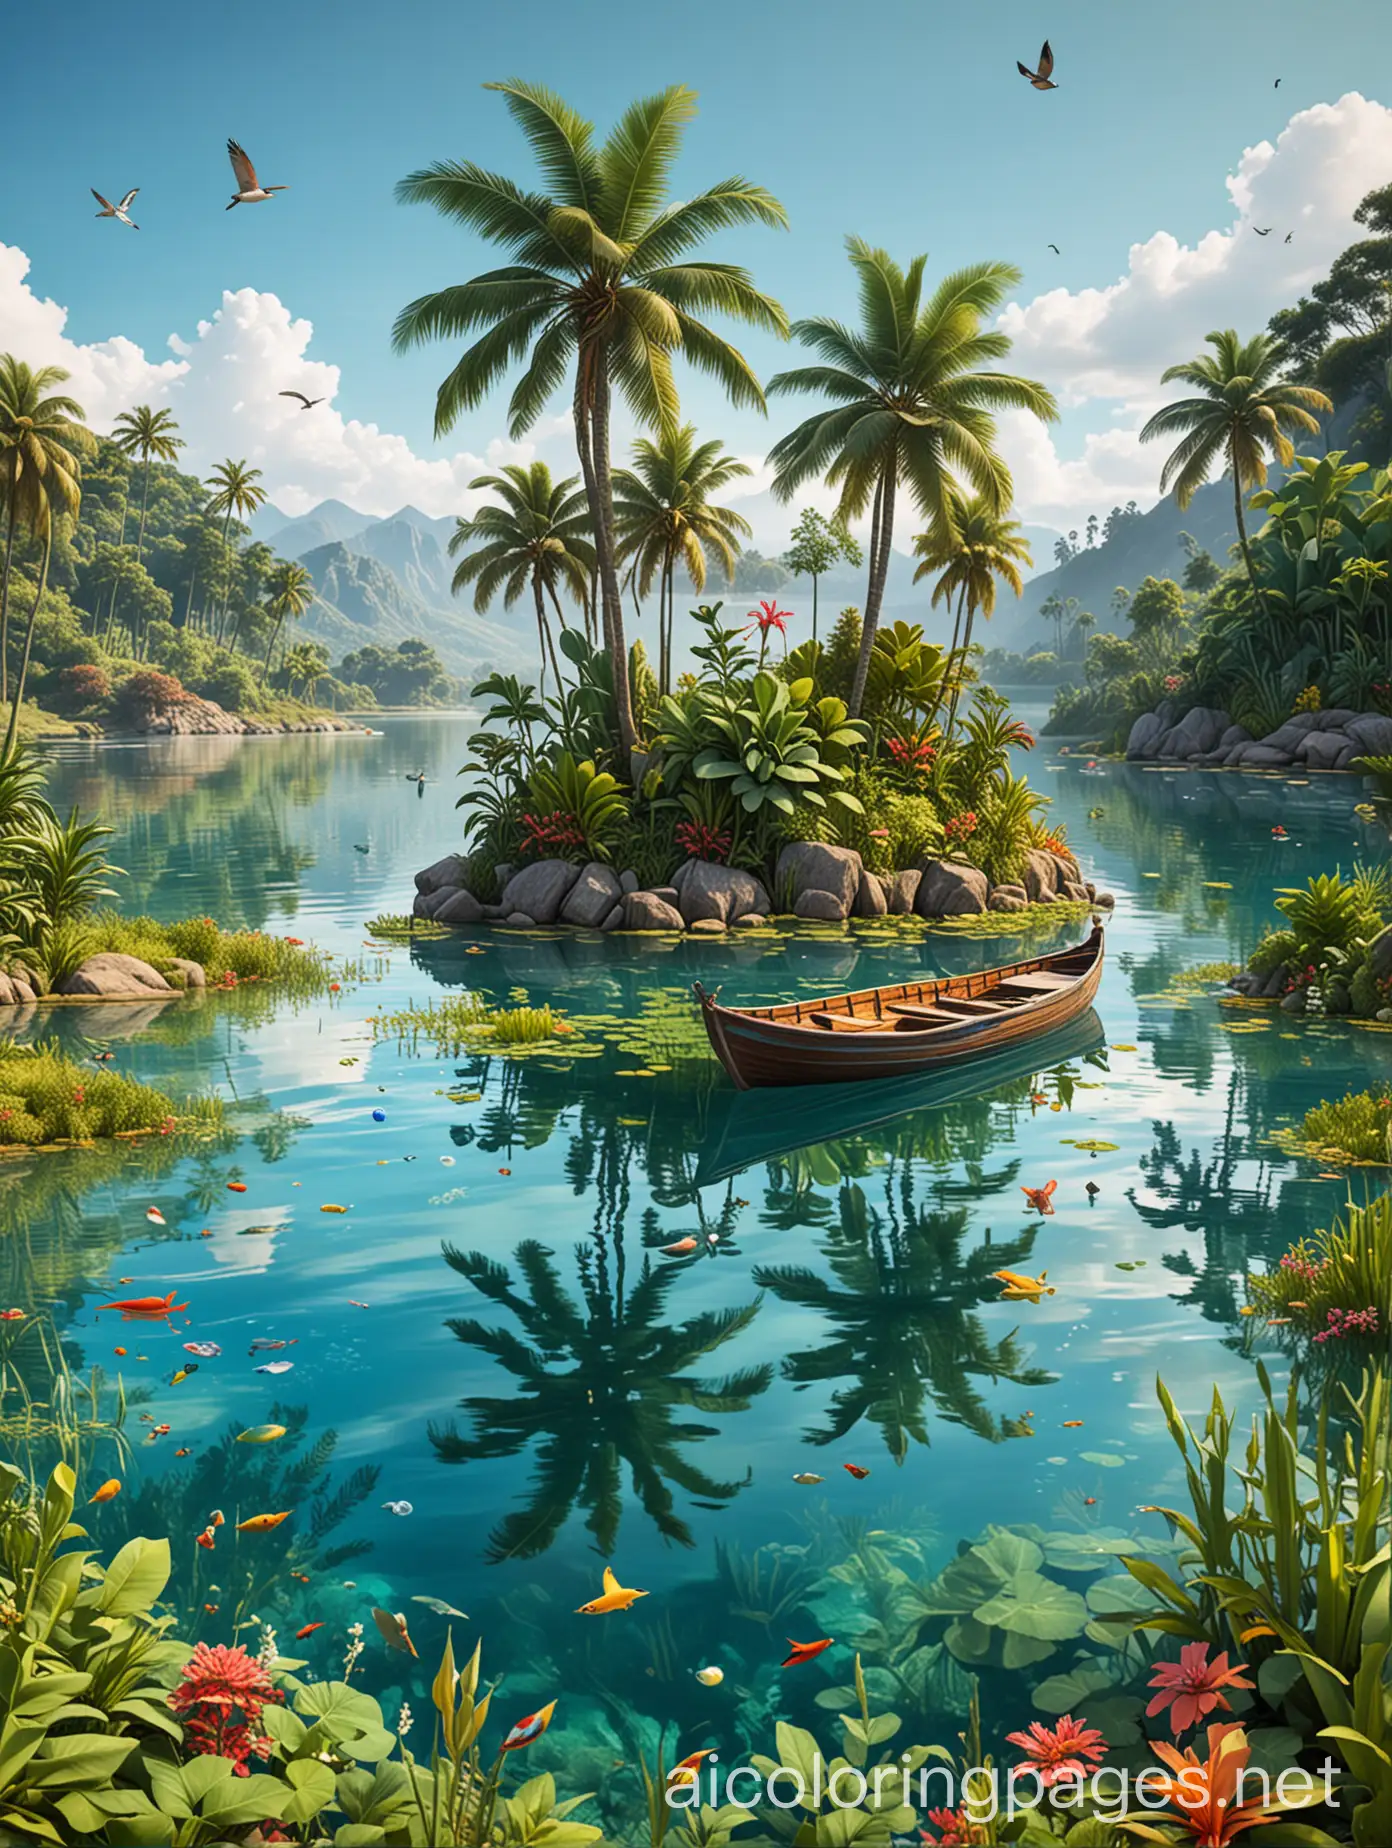 Description: A legendary lake with very transparent water. A small glass boat floats on it, half of it inside the lake’s water. Colorful herbs and fish appear inside the transparent water. The sky is blue and clear and some colorful birds are flying. On the edge of the lake there is a small island with palm trees and bananas. The image is high quality and natural, without any errors or distortions. , Coloring Page, black and white, line art, white background, Simplicity, Ample White Space. The background of the coloring page is plain white to make it easy for young children to color within the lines. The outlines of all the subjects are easy to distinguish, making it simple for kids to color without too much difficulty